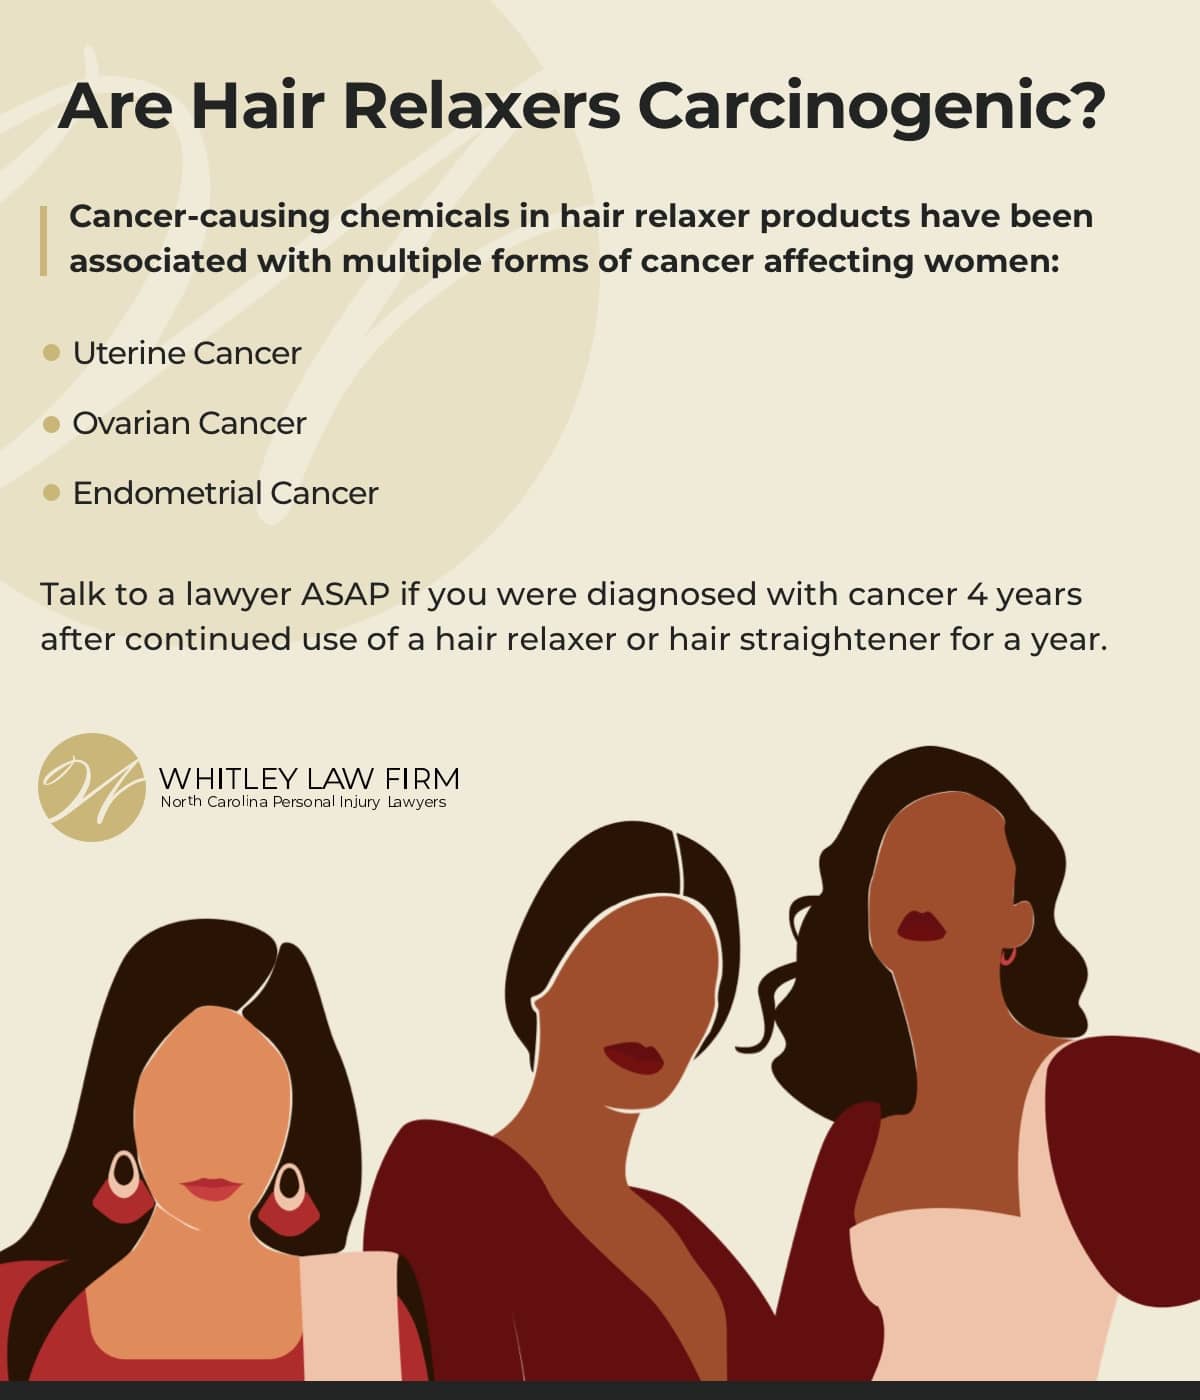 are hair relaxers carcinogenic?